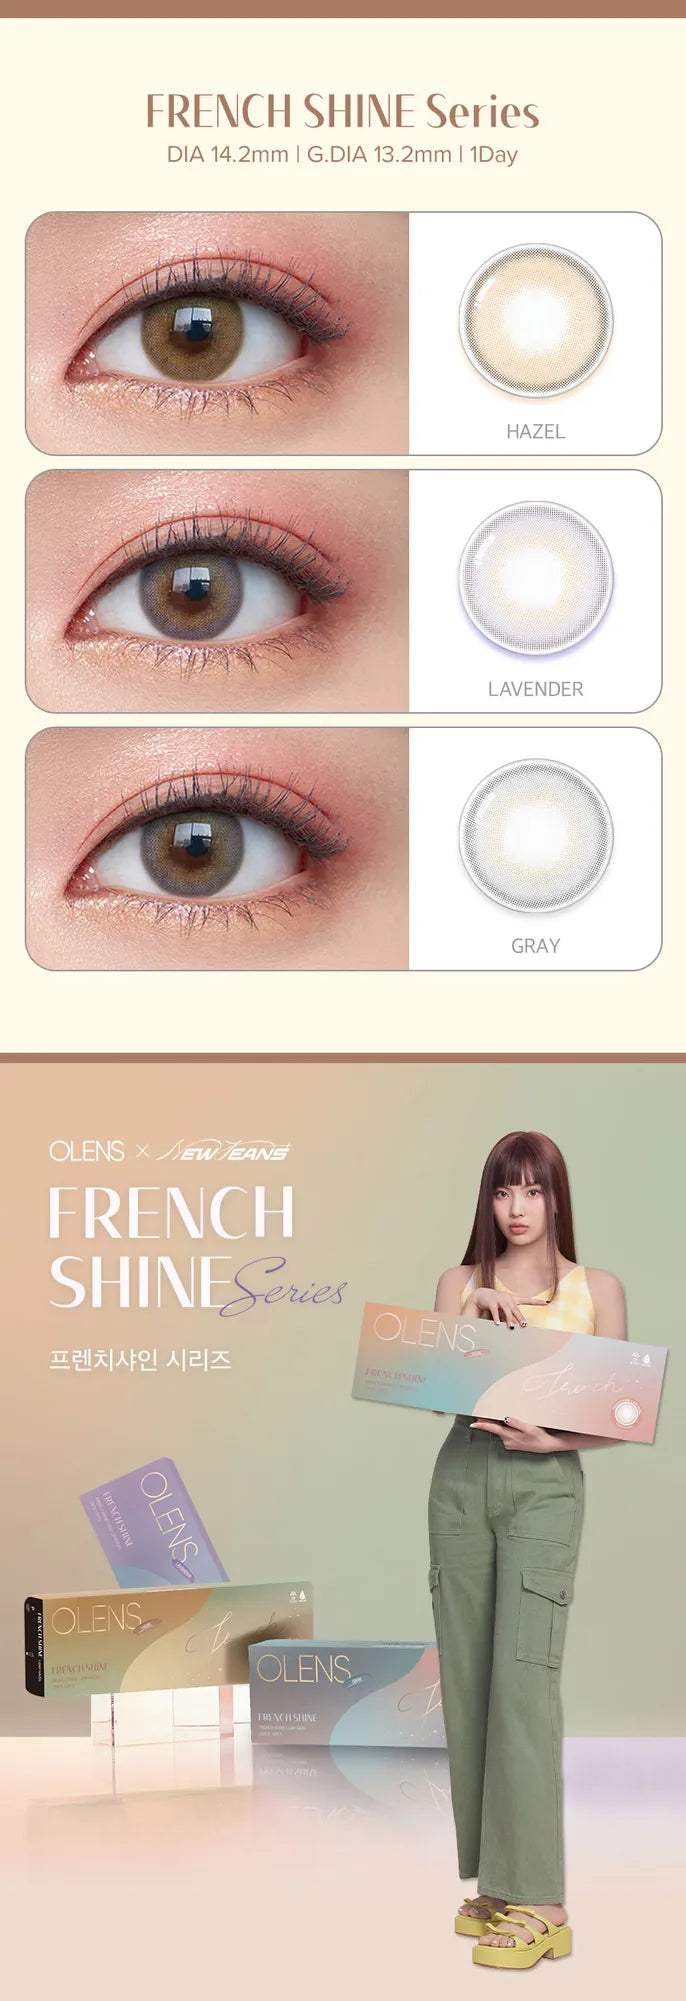 [O Lens x New Jeans] French Shine One Day (Gray, Lavender, Hazel)